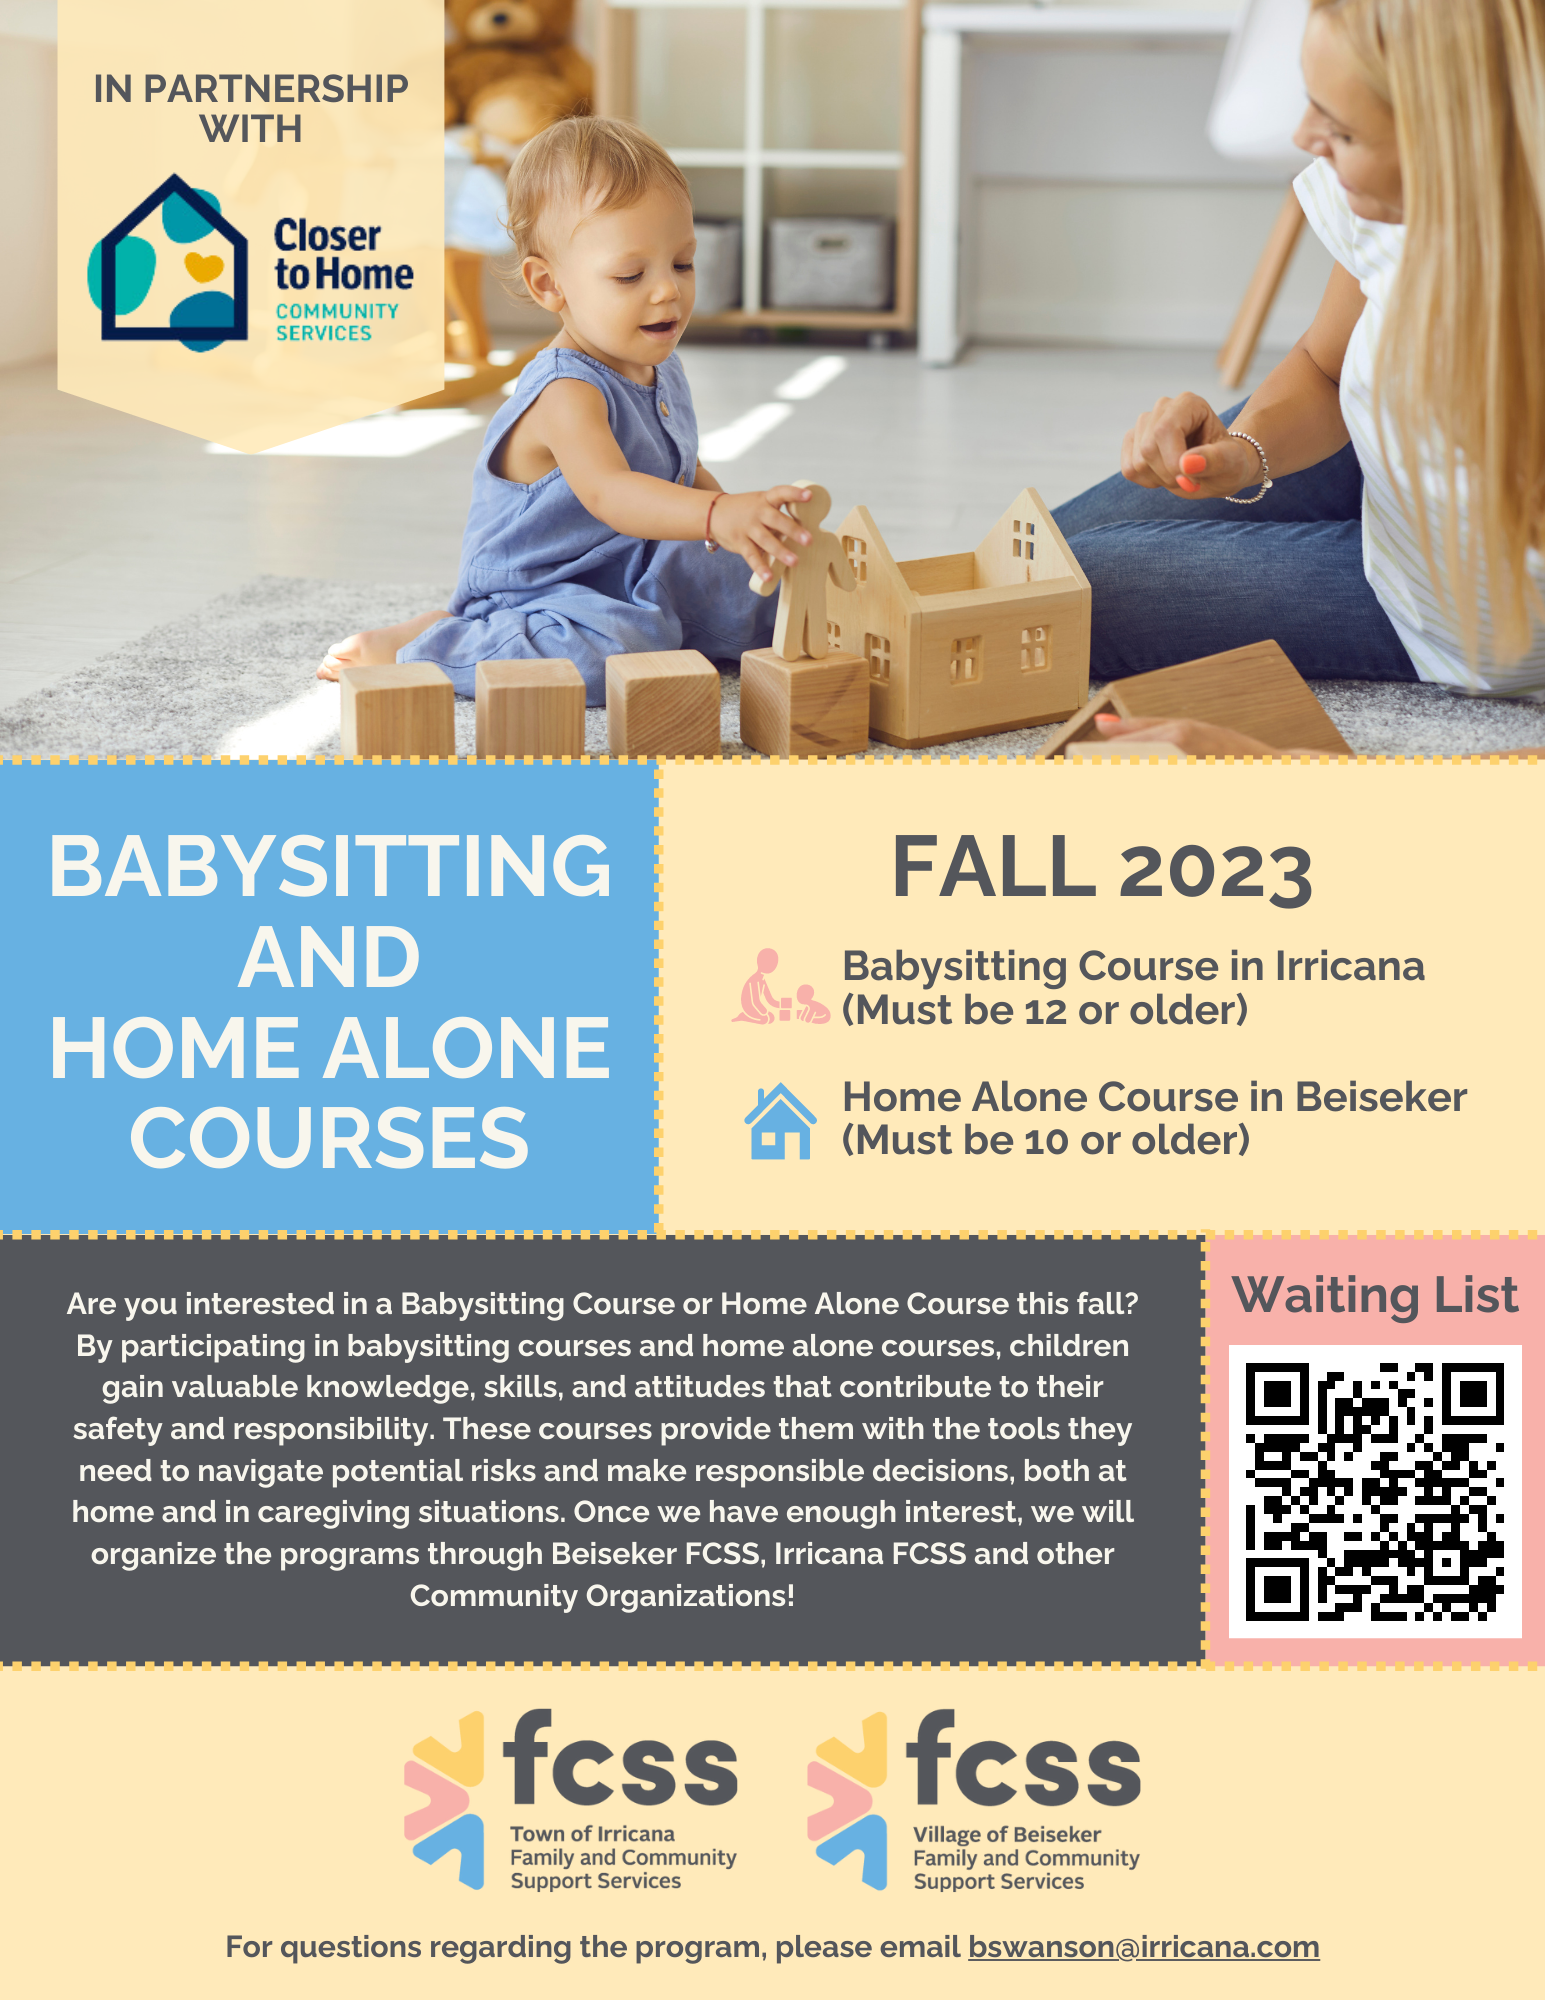 Babysitting and Home Alone Course Waiting List for Fall 2023 in Irricana and Beiseker